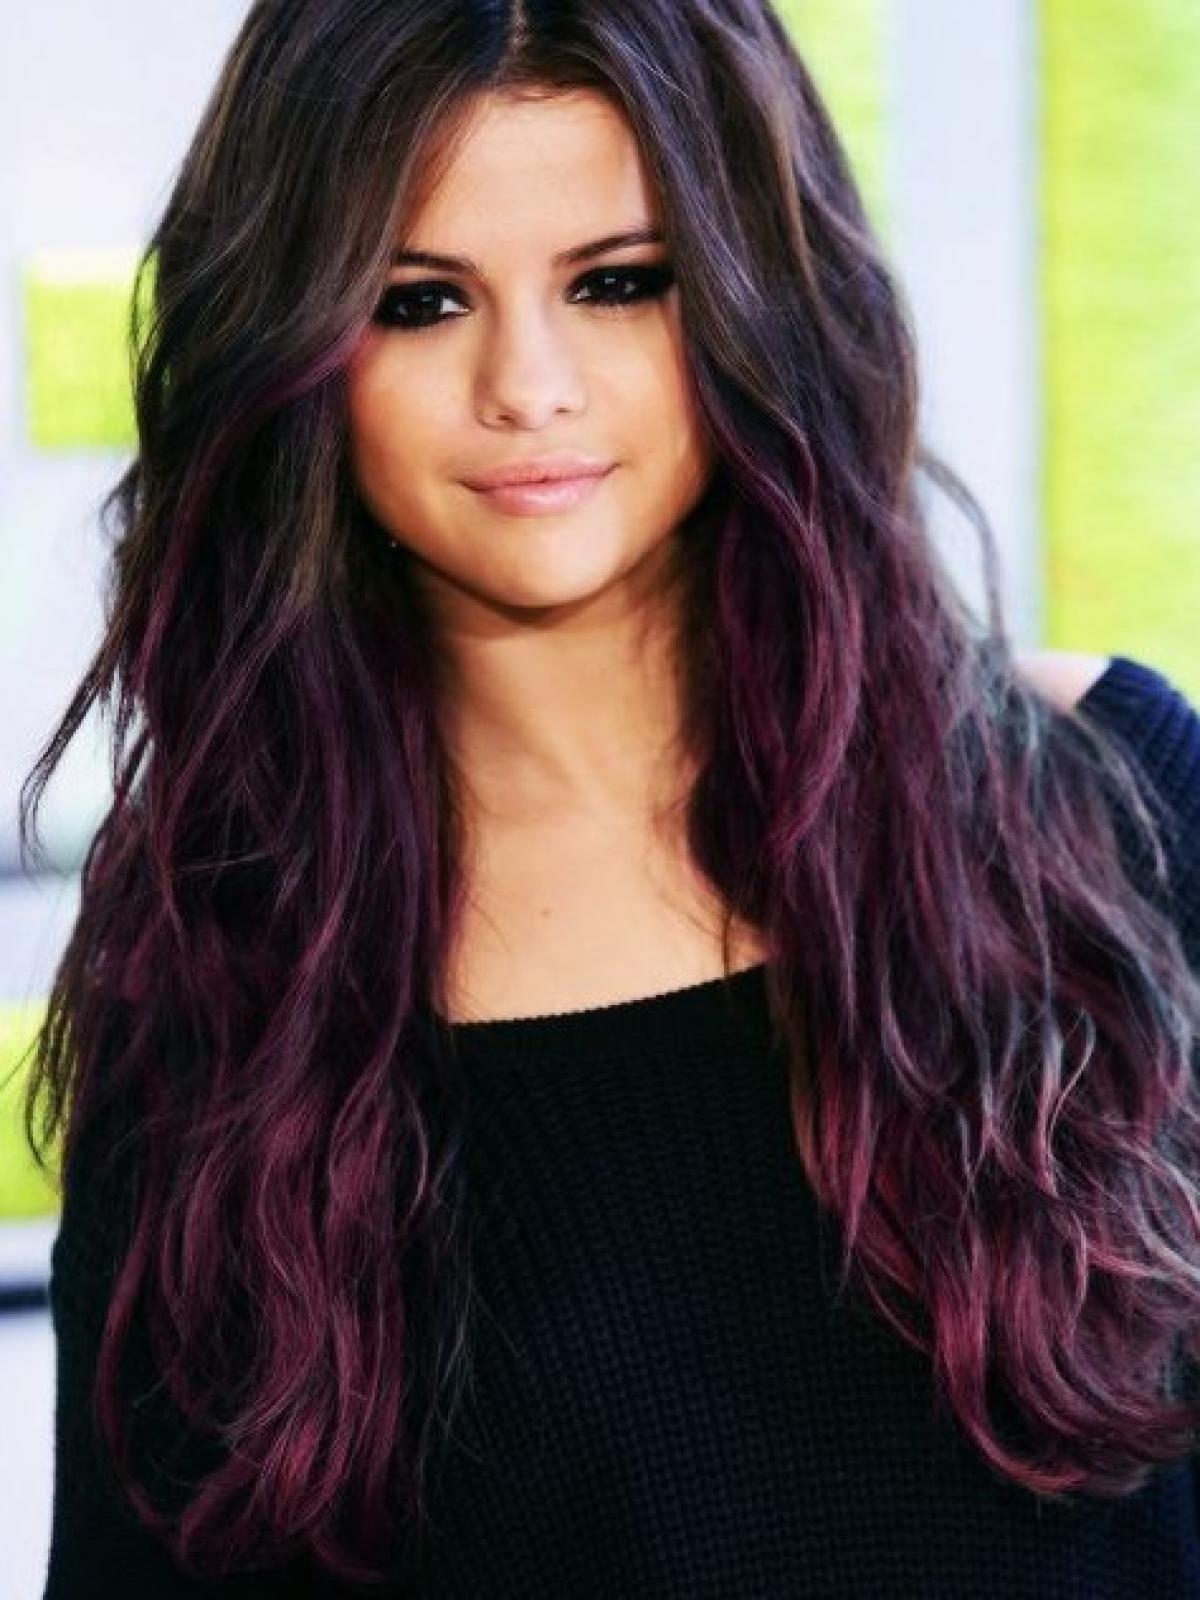 25 HQ Images Two Tone Hair Purple And Black : 70 Beautiful Blue And Purple Hair Color Ideas Hairstylecamp